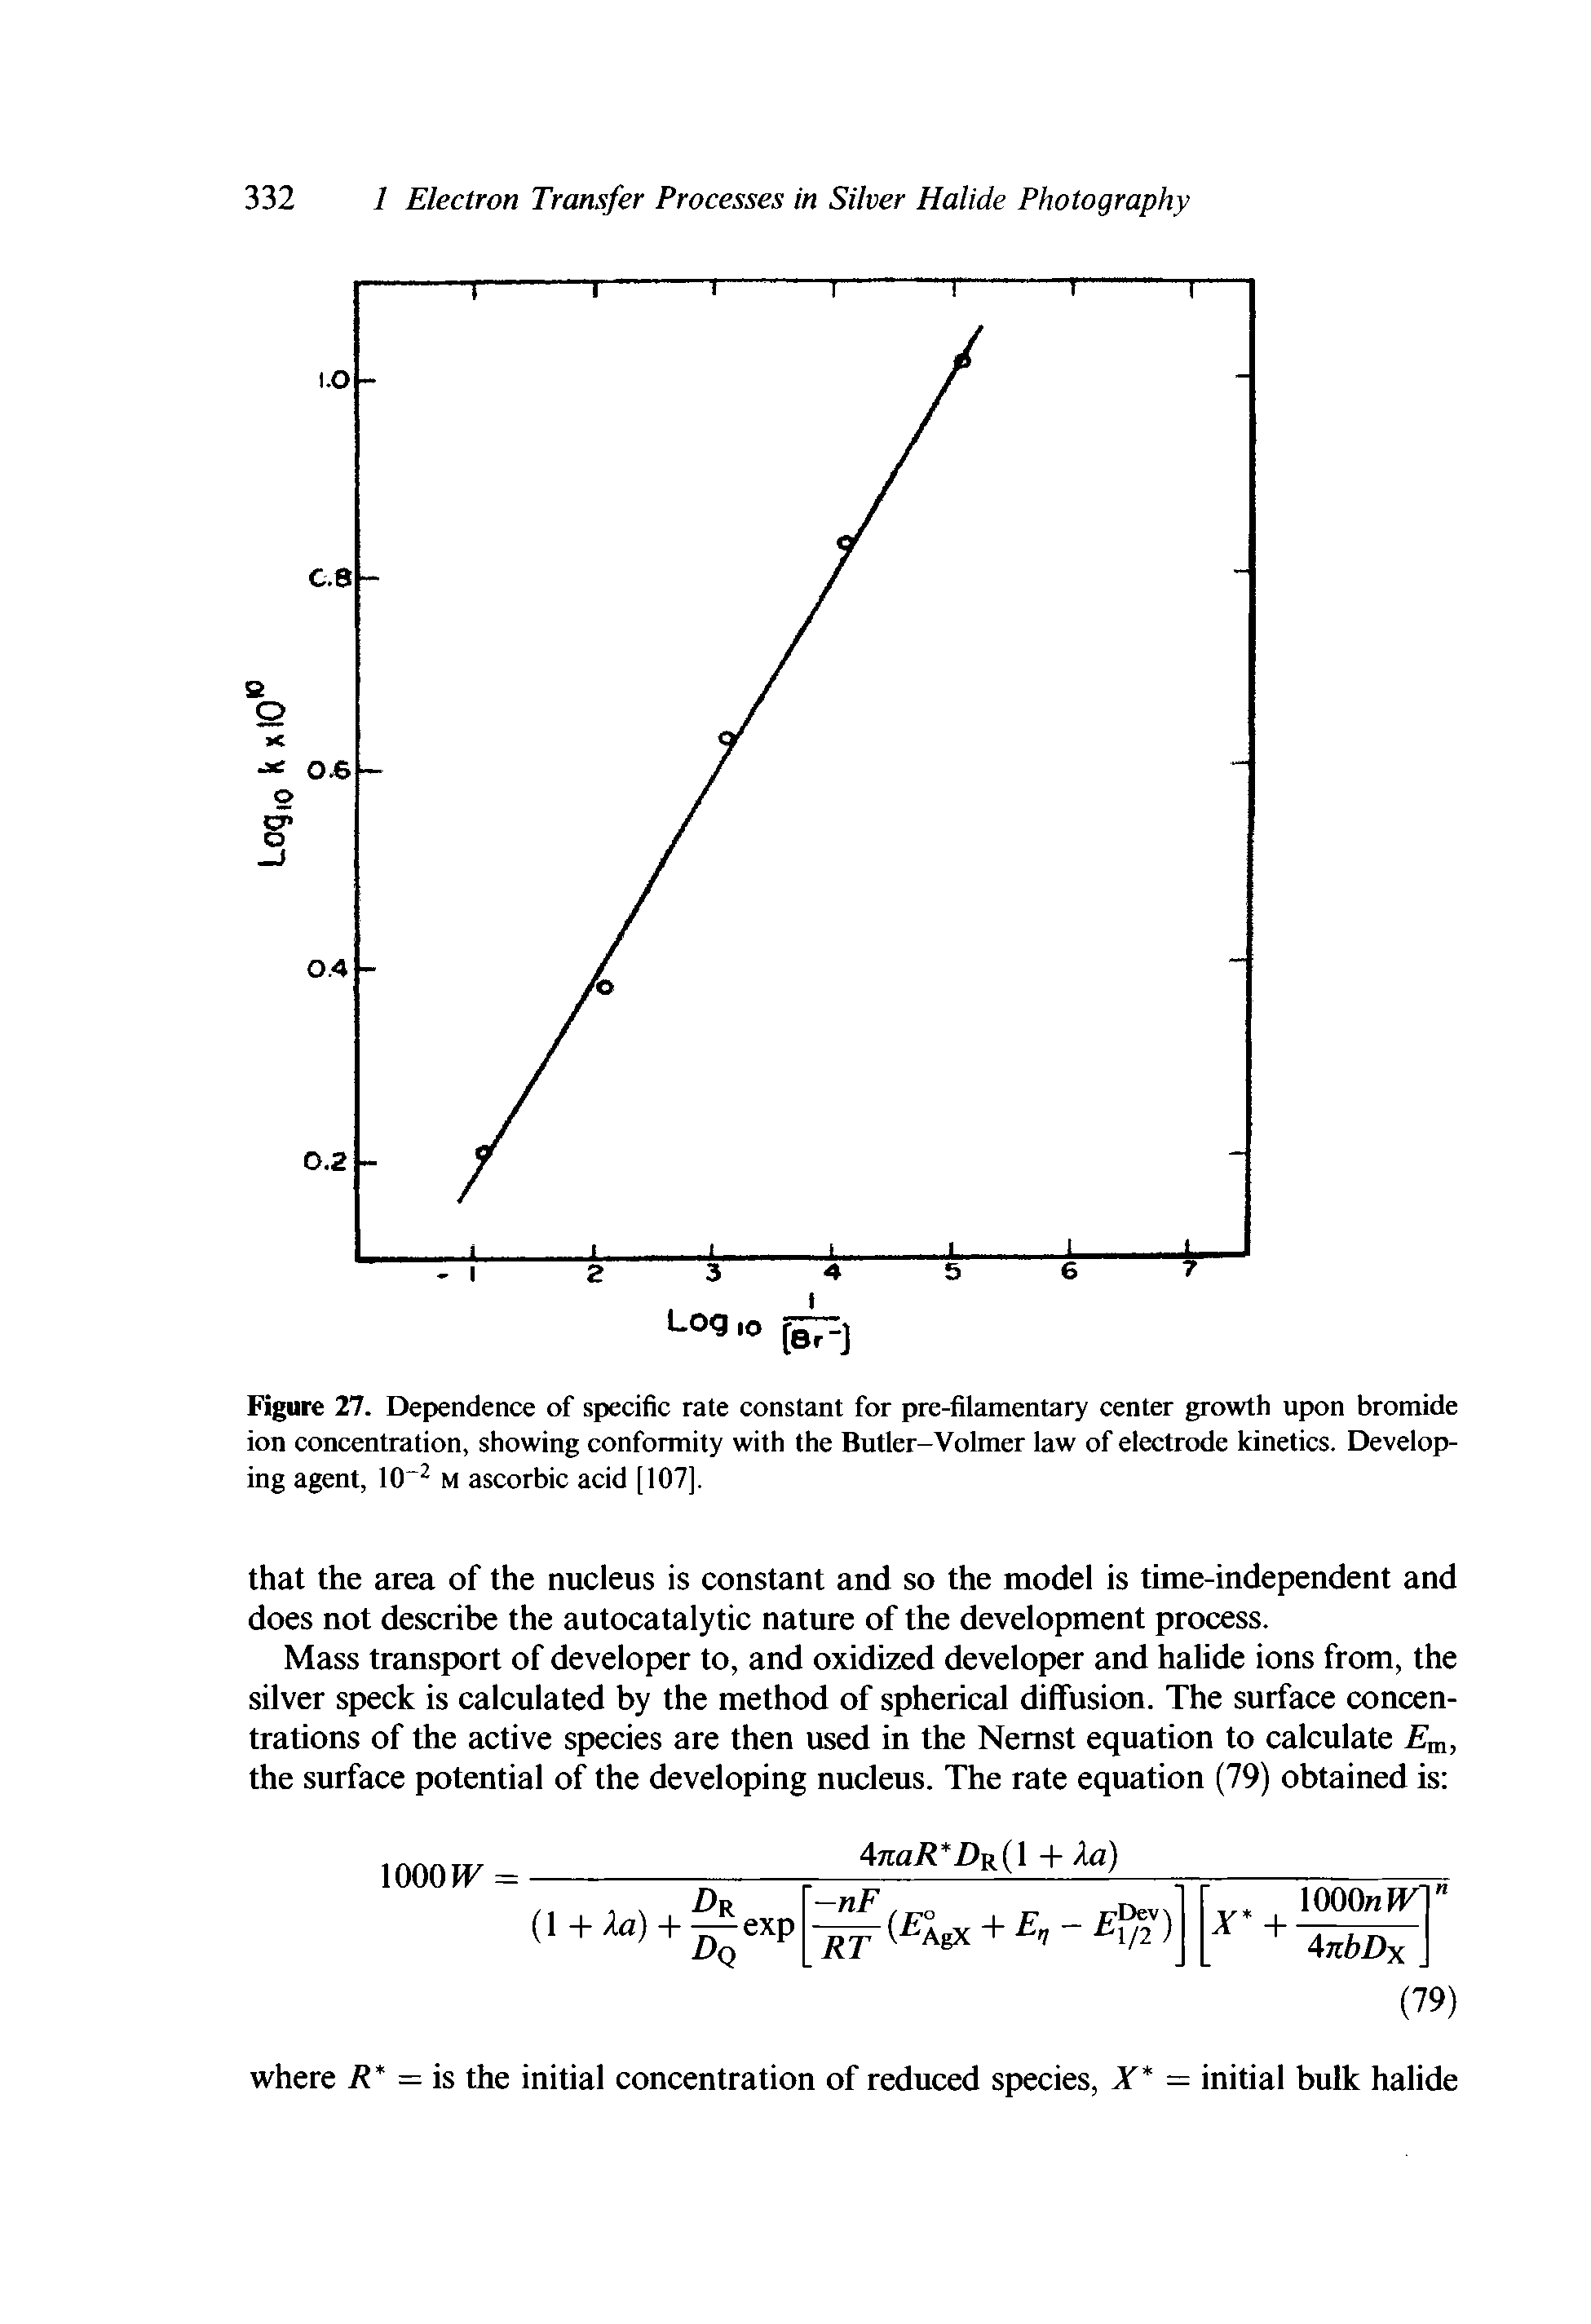 Figure 27. Dependence of specific rate constant for pre-filamentary center growth upon bromide ion concentration, showing conformity with the Butler-Volmer law of electrode kinetics. Developing agent, 10 m ascorbic acid [107].